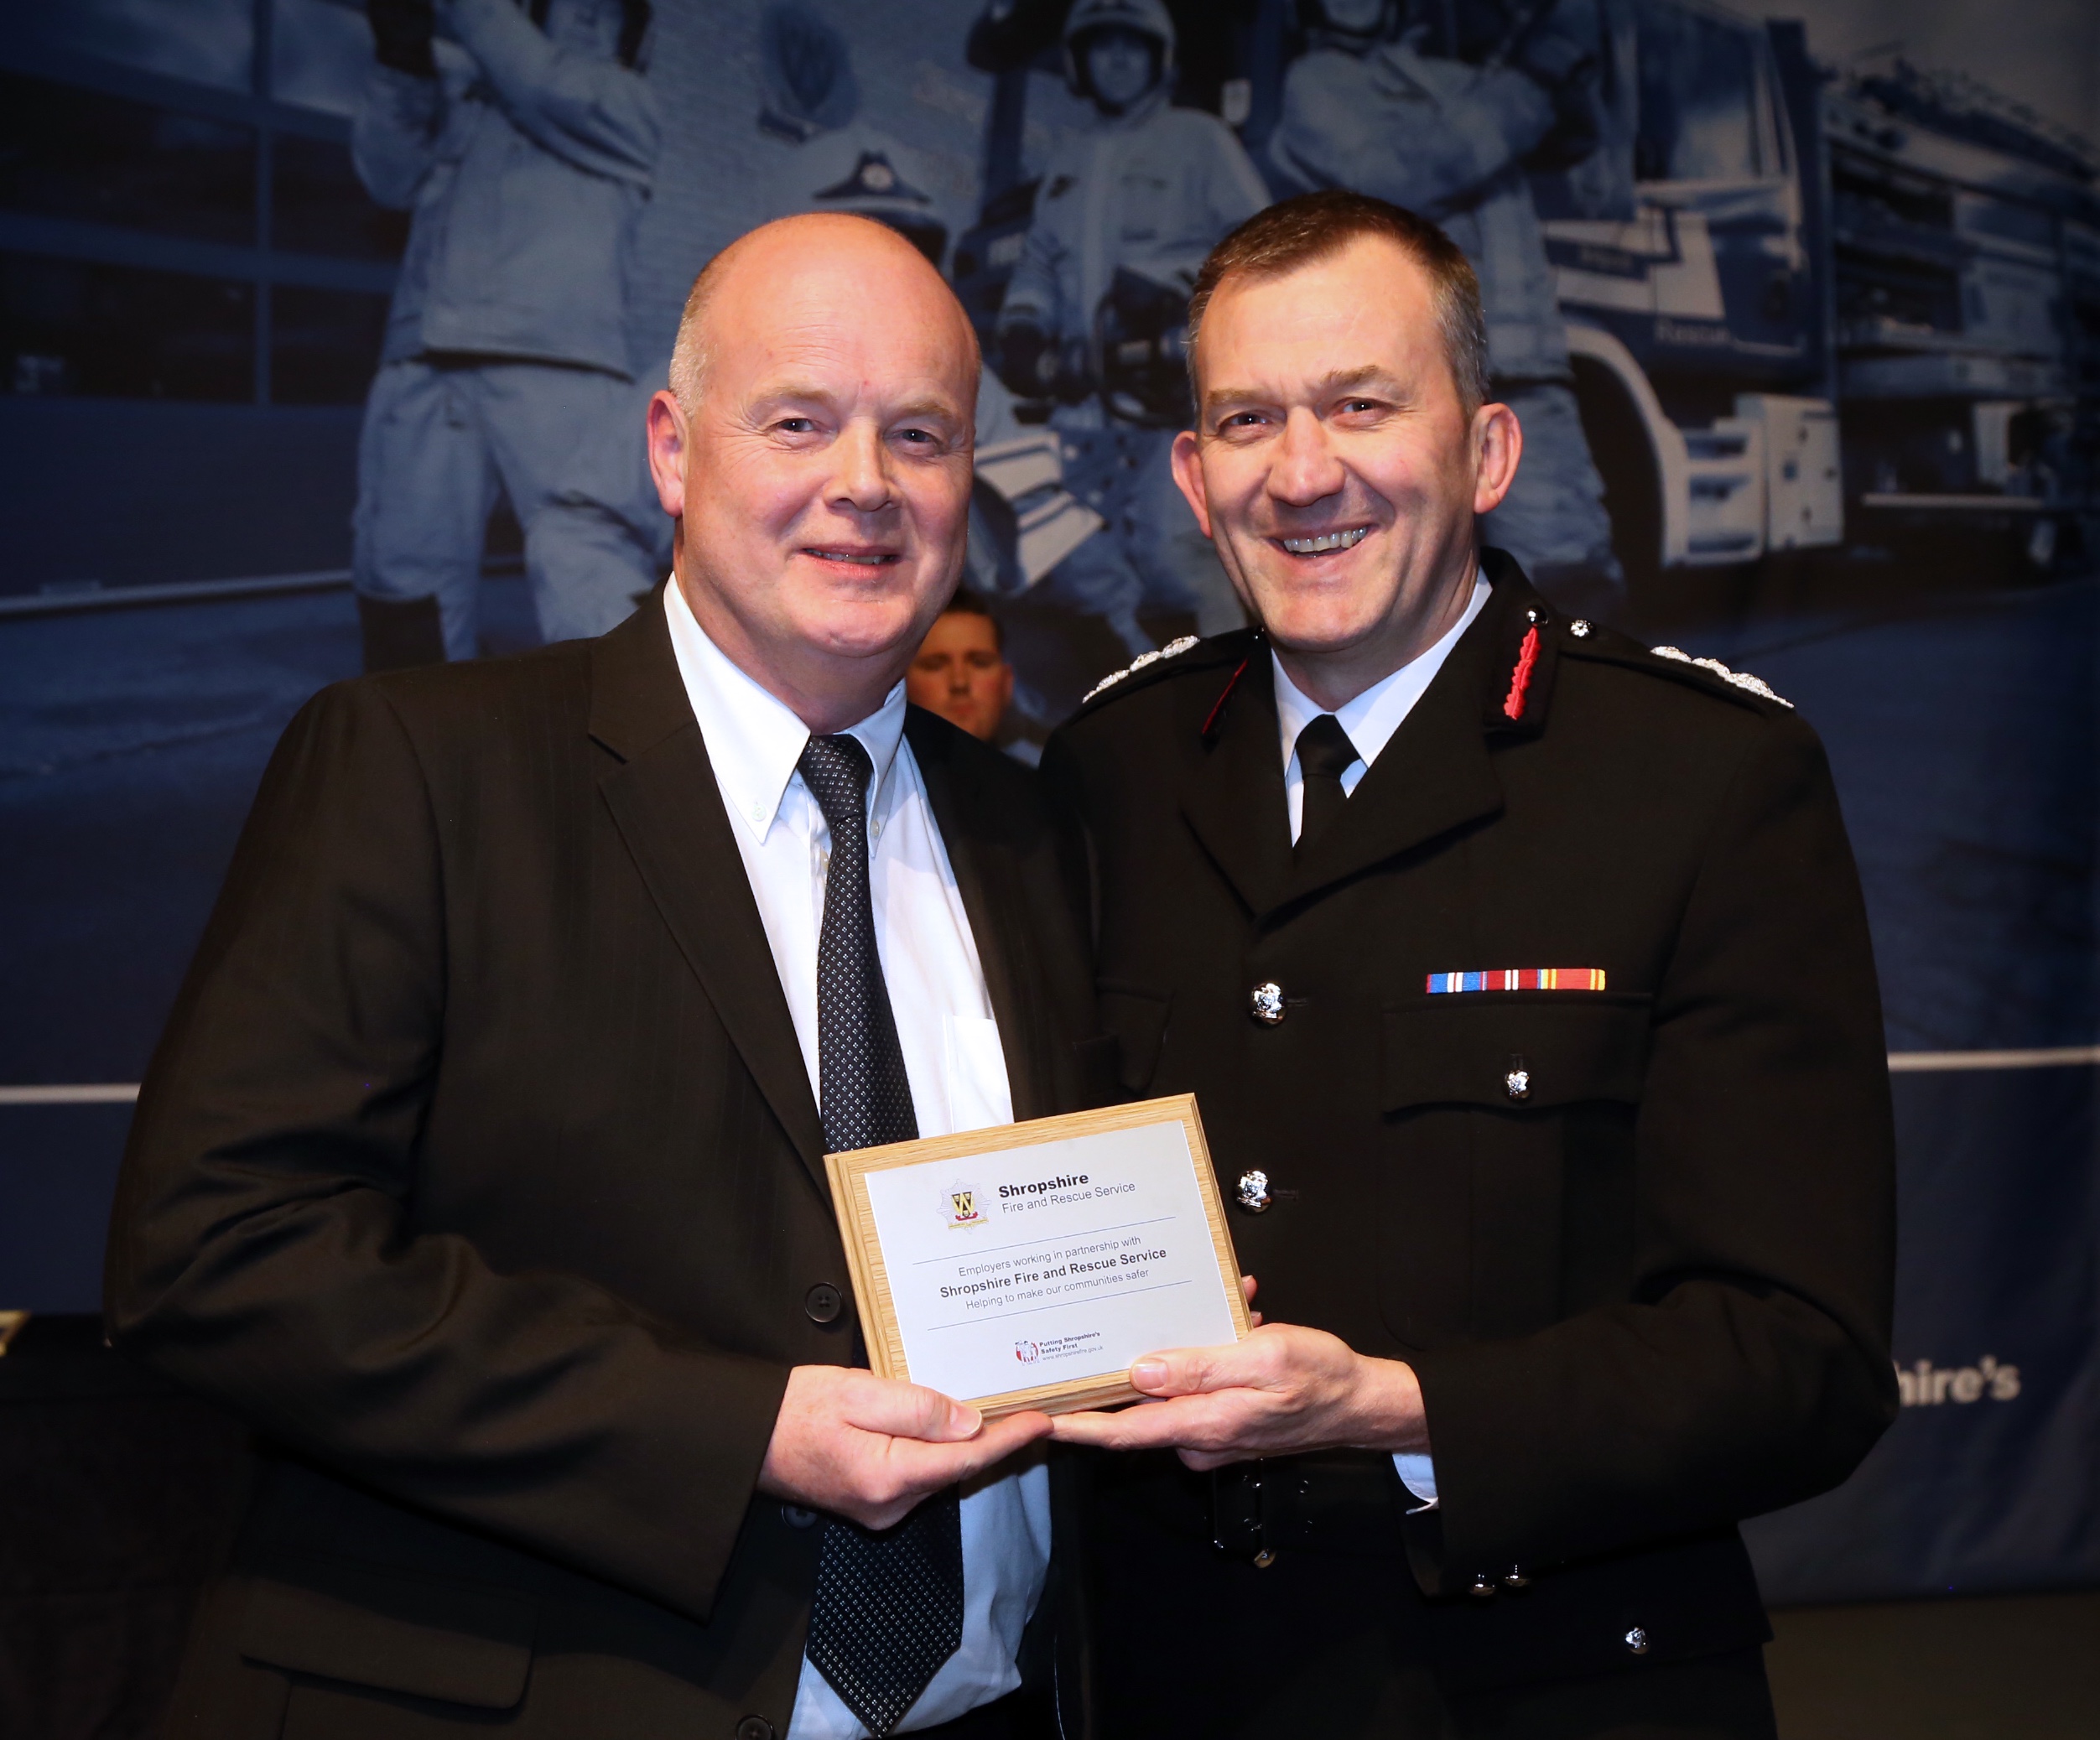 Europa Fastenings MD Stephen Cowan with the employers' award from Chief Fire Officer Rod Hammerton